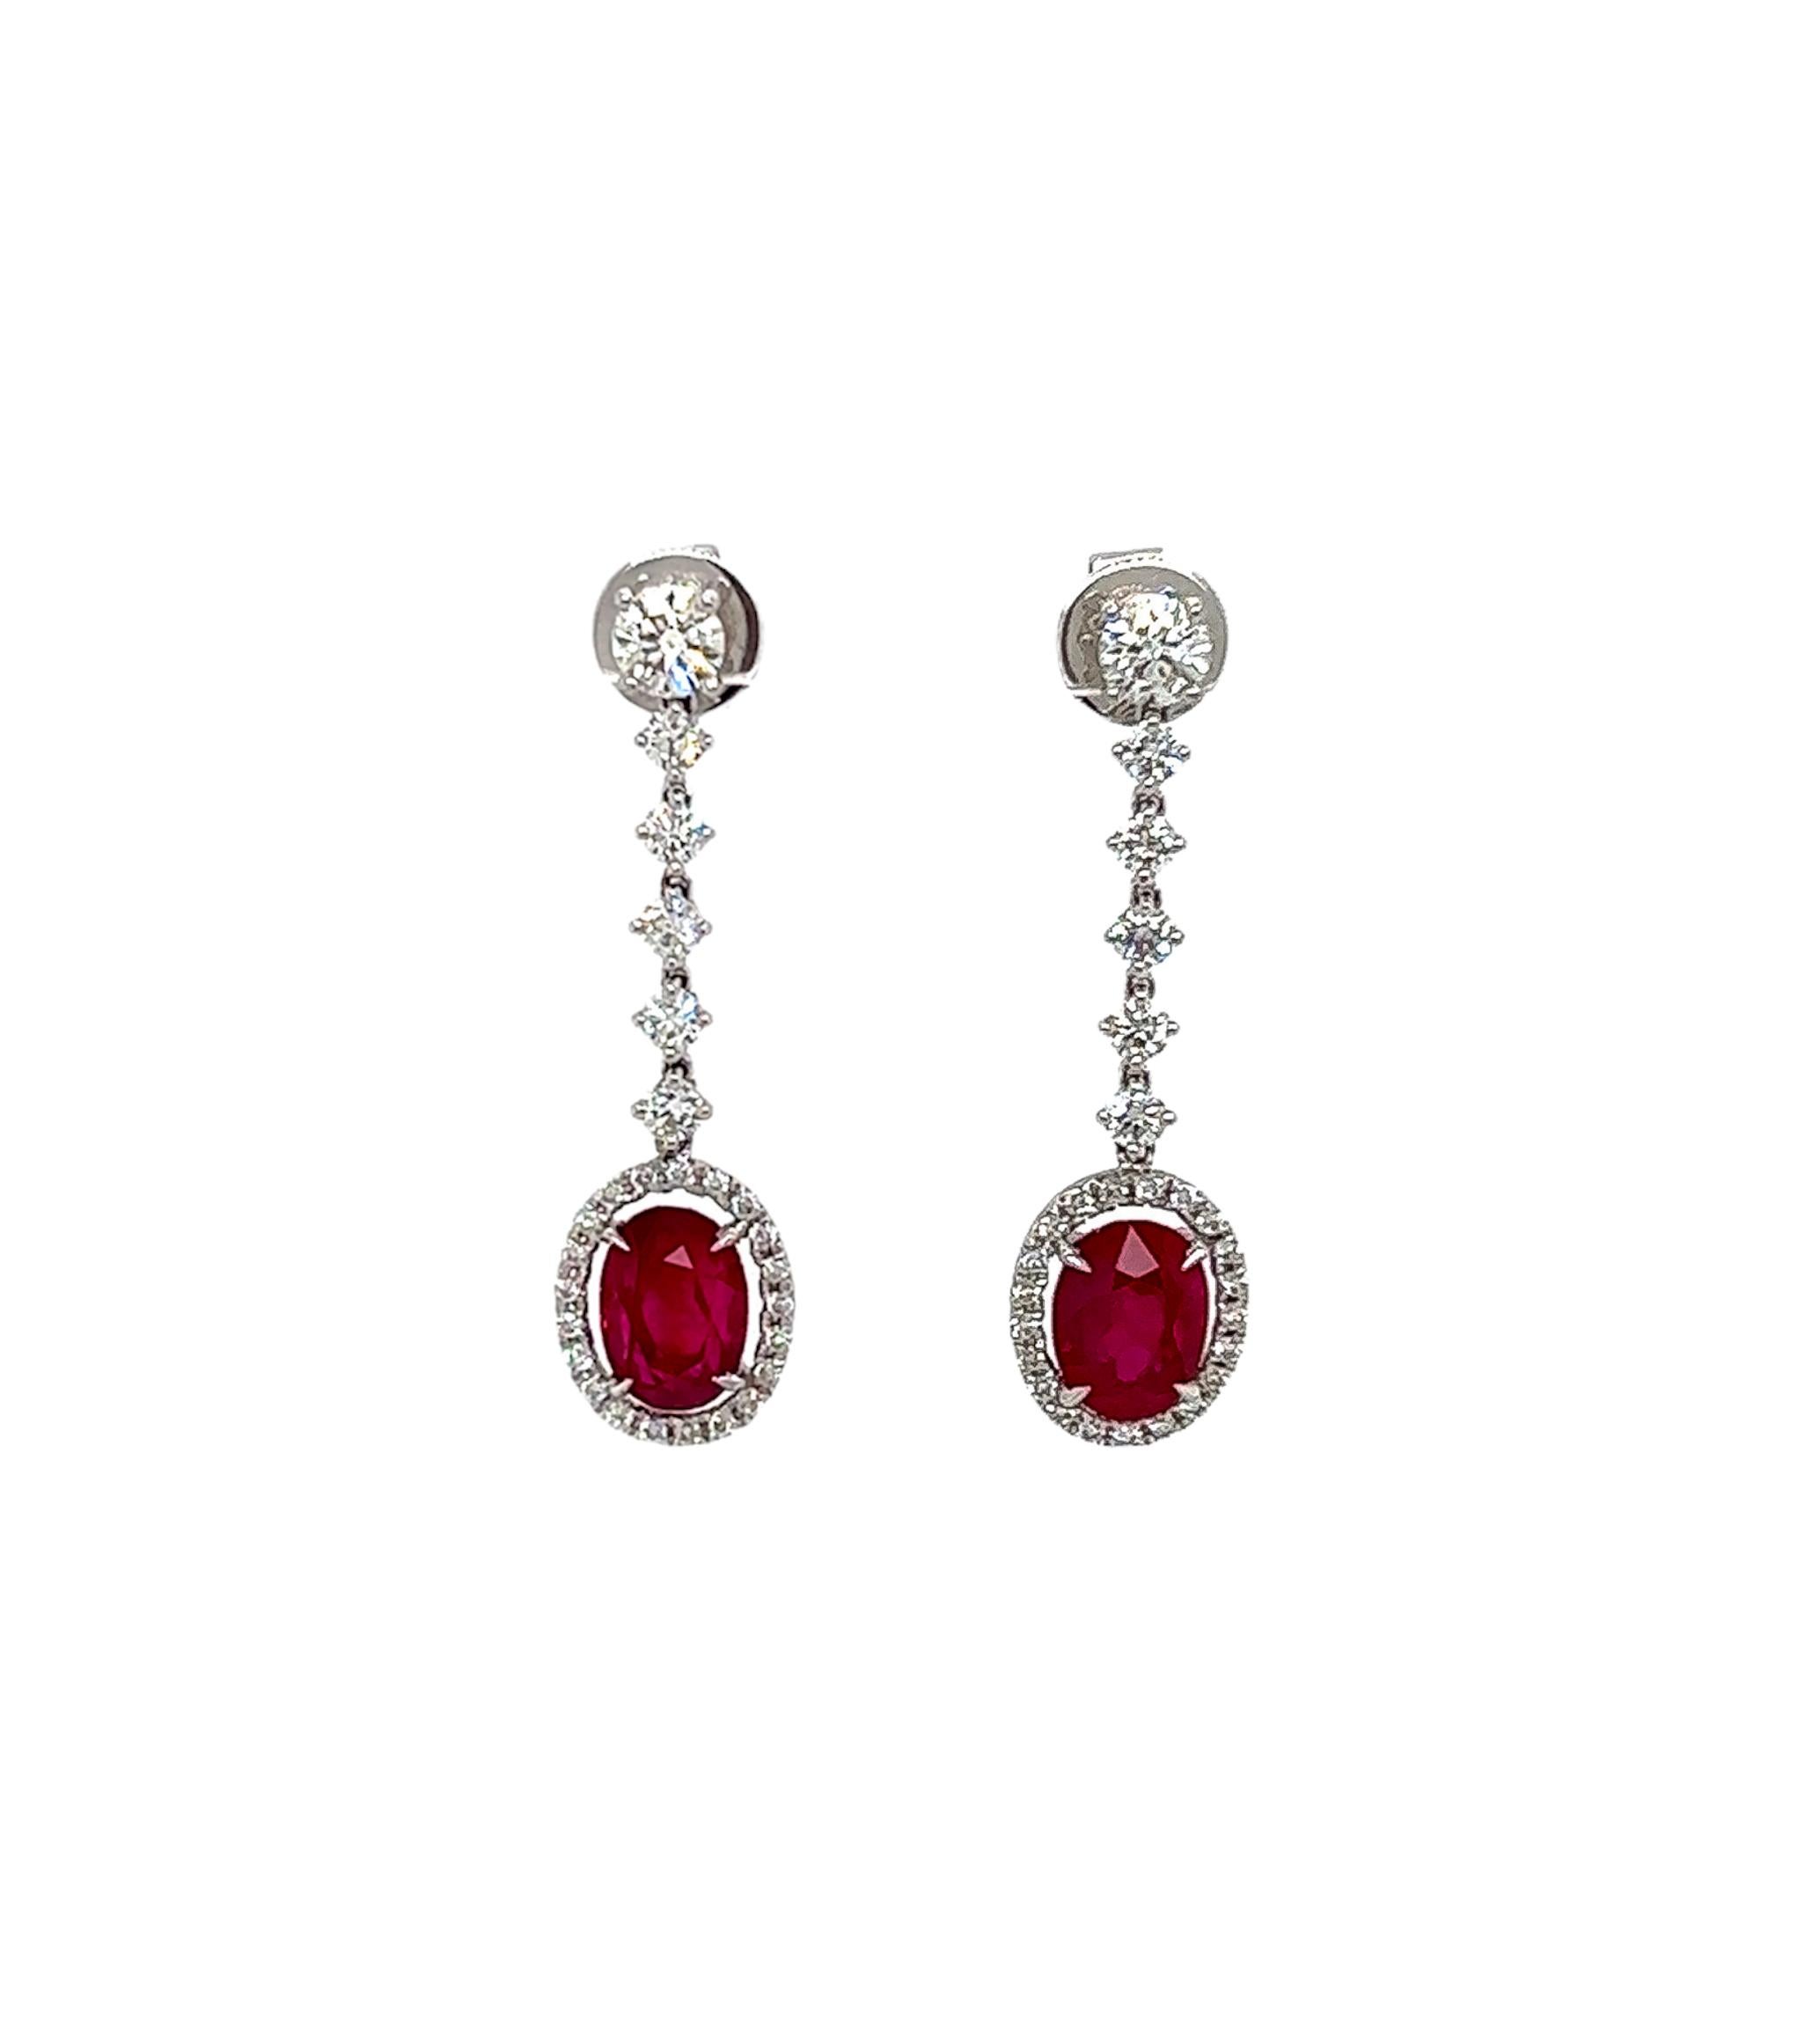 5.21 Total Carat Ruby and Diamond Drop Earrings in 18K White Gold

This gorgeous pair of Ruby earrings are sure to draw all eyes on you. It is created with generous 4.03 Carats worth of Oval cut rubies, surrounded by a halo and drop decorated with